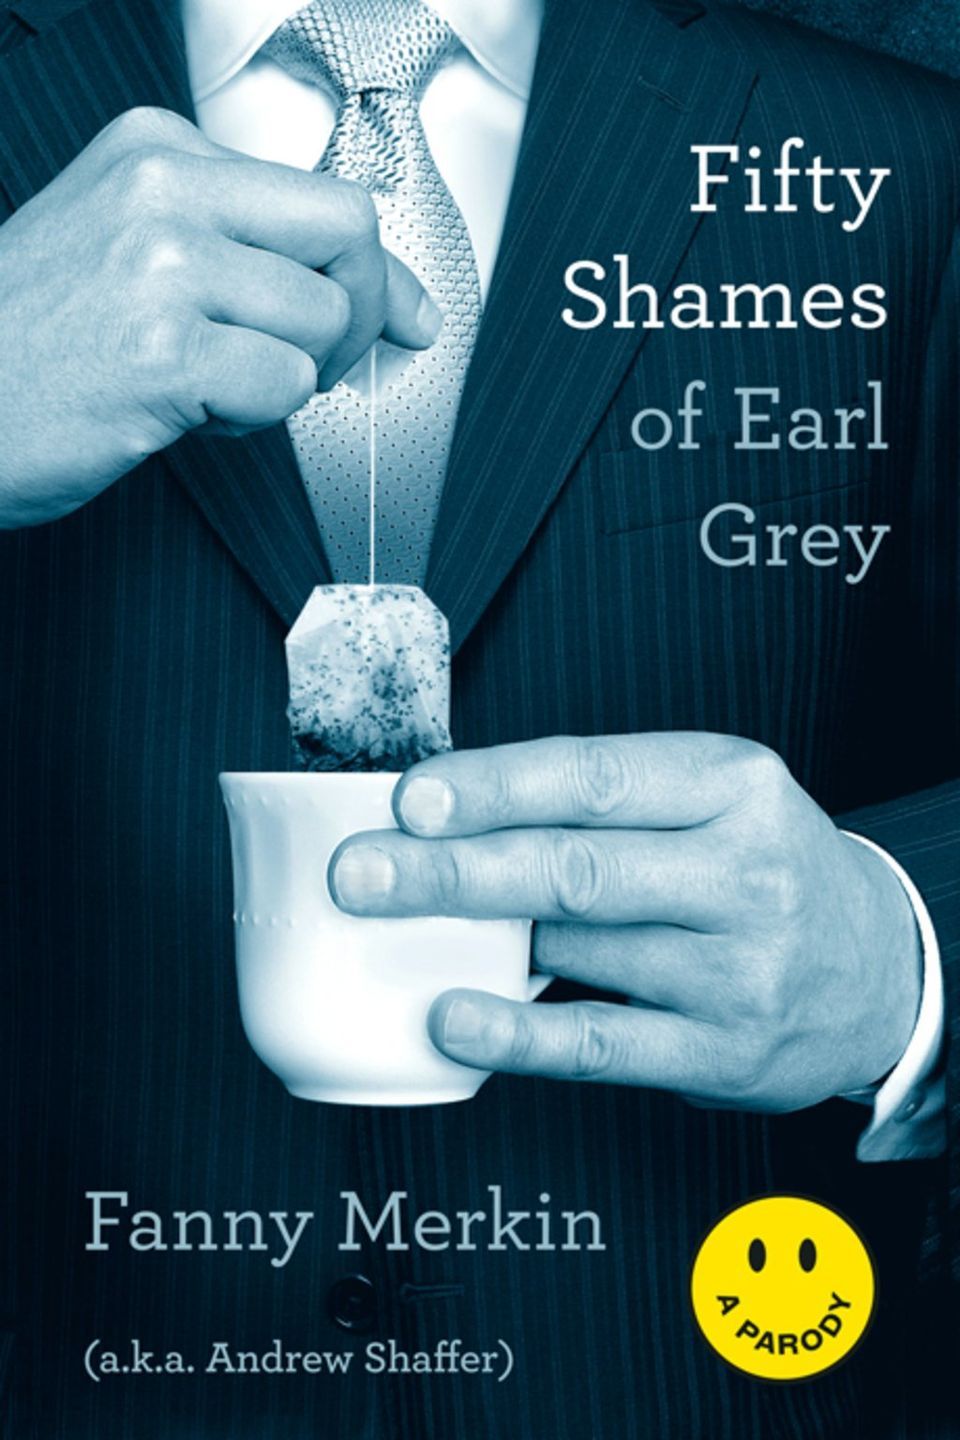 10-things-you-didnt-know-about-fifty-shades-of-grey